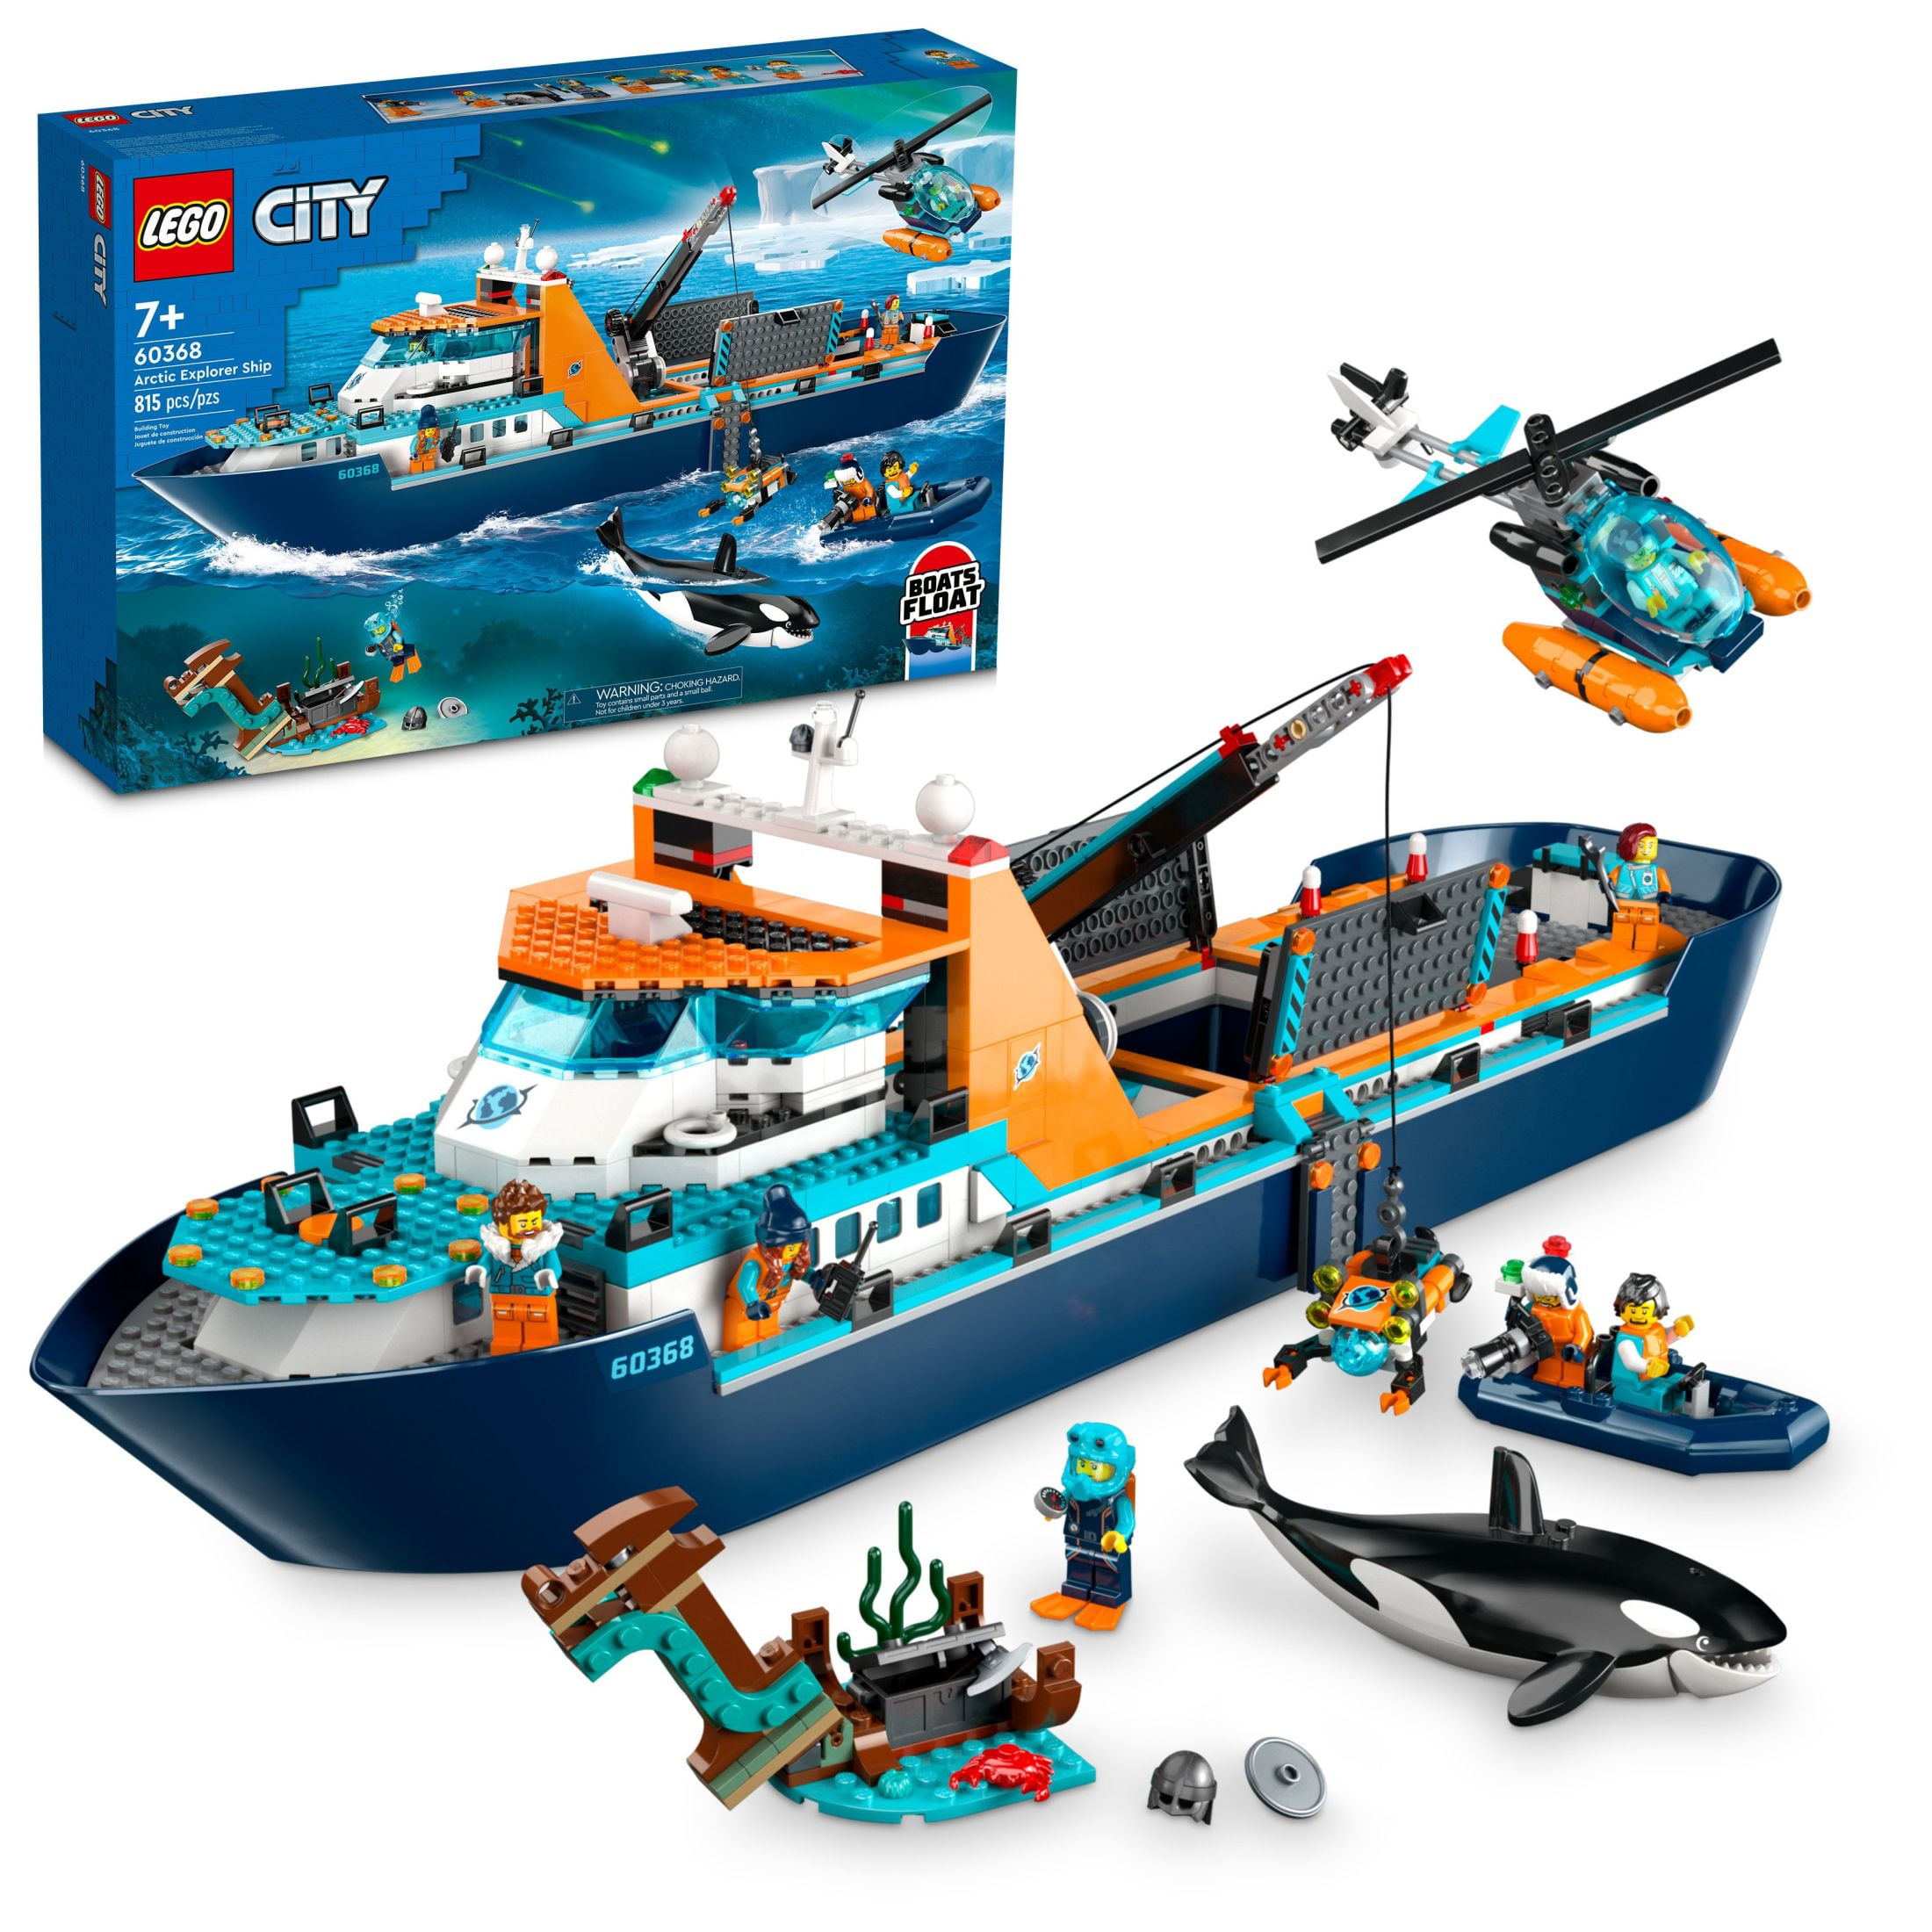 LEGO City Arctic Explorer Ship 60368 Building Toy Set, Fun Toy Gift for 7  year old Boys and Girls, with a Floatable Boat, Helicopter, Dinghy, ROV  Sub, Viking Shipwreck, 7 Minifigures and